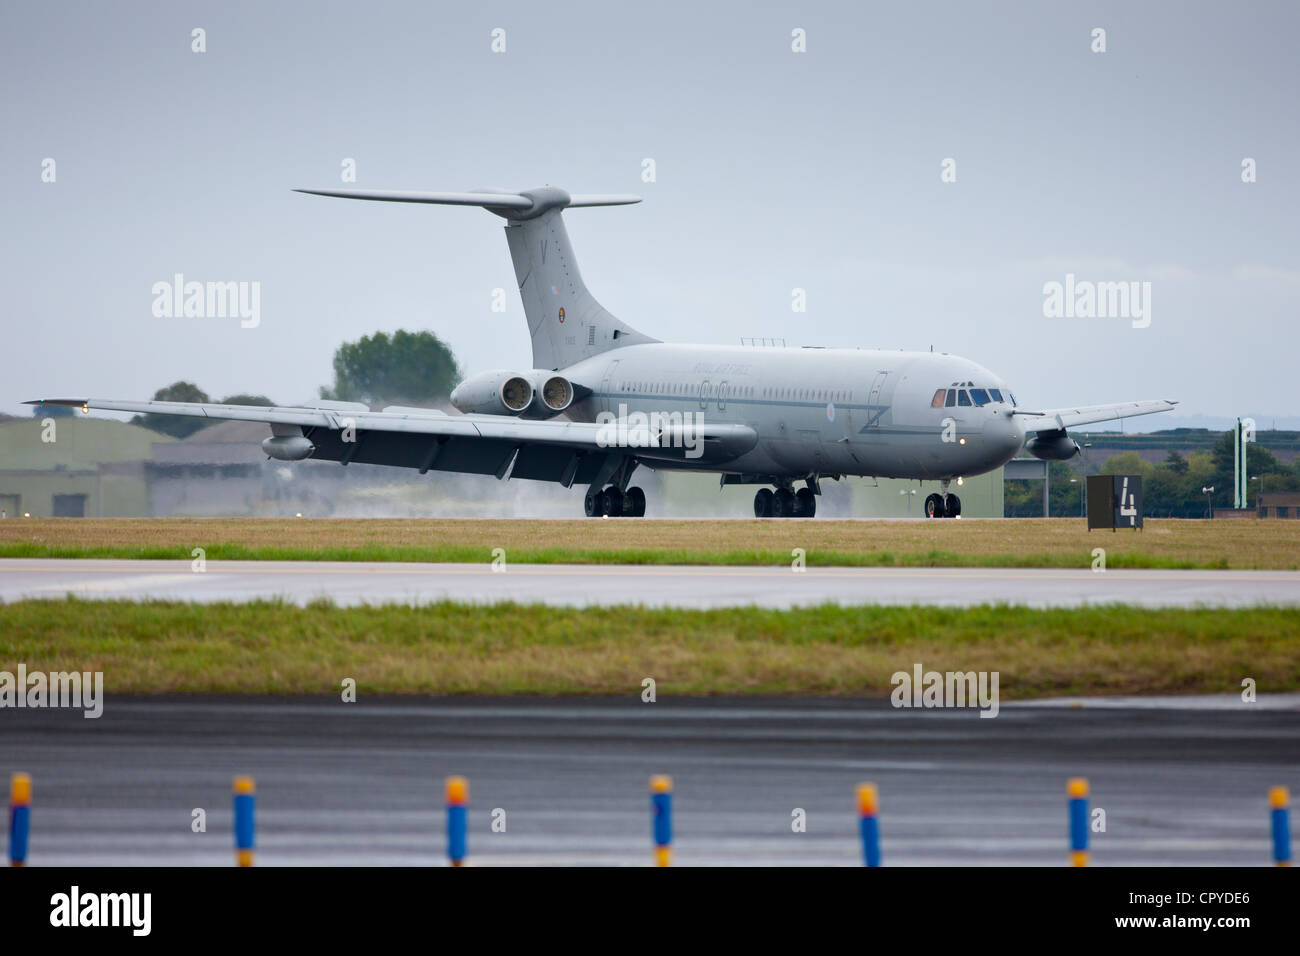 RAF Vickers VC10 air tanker plane landing at RAF Brize Norton Air Base in Oxfordshire, UK Stock Photo